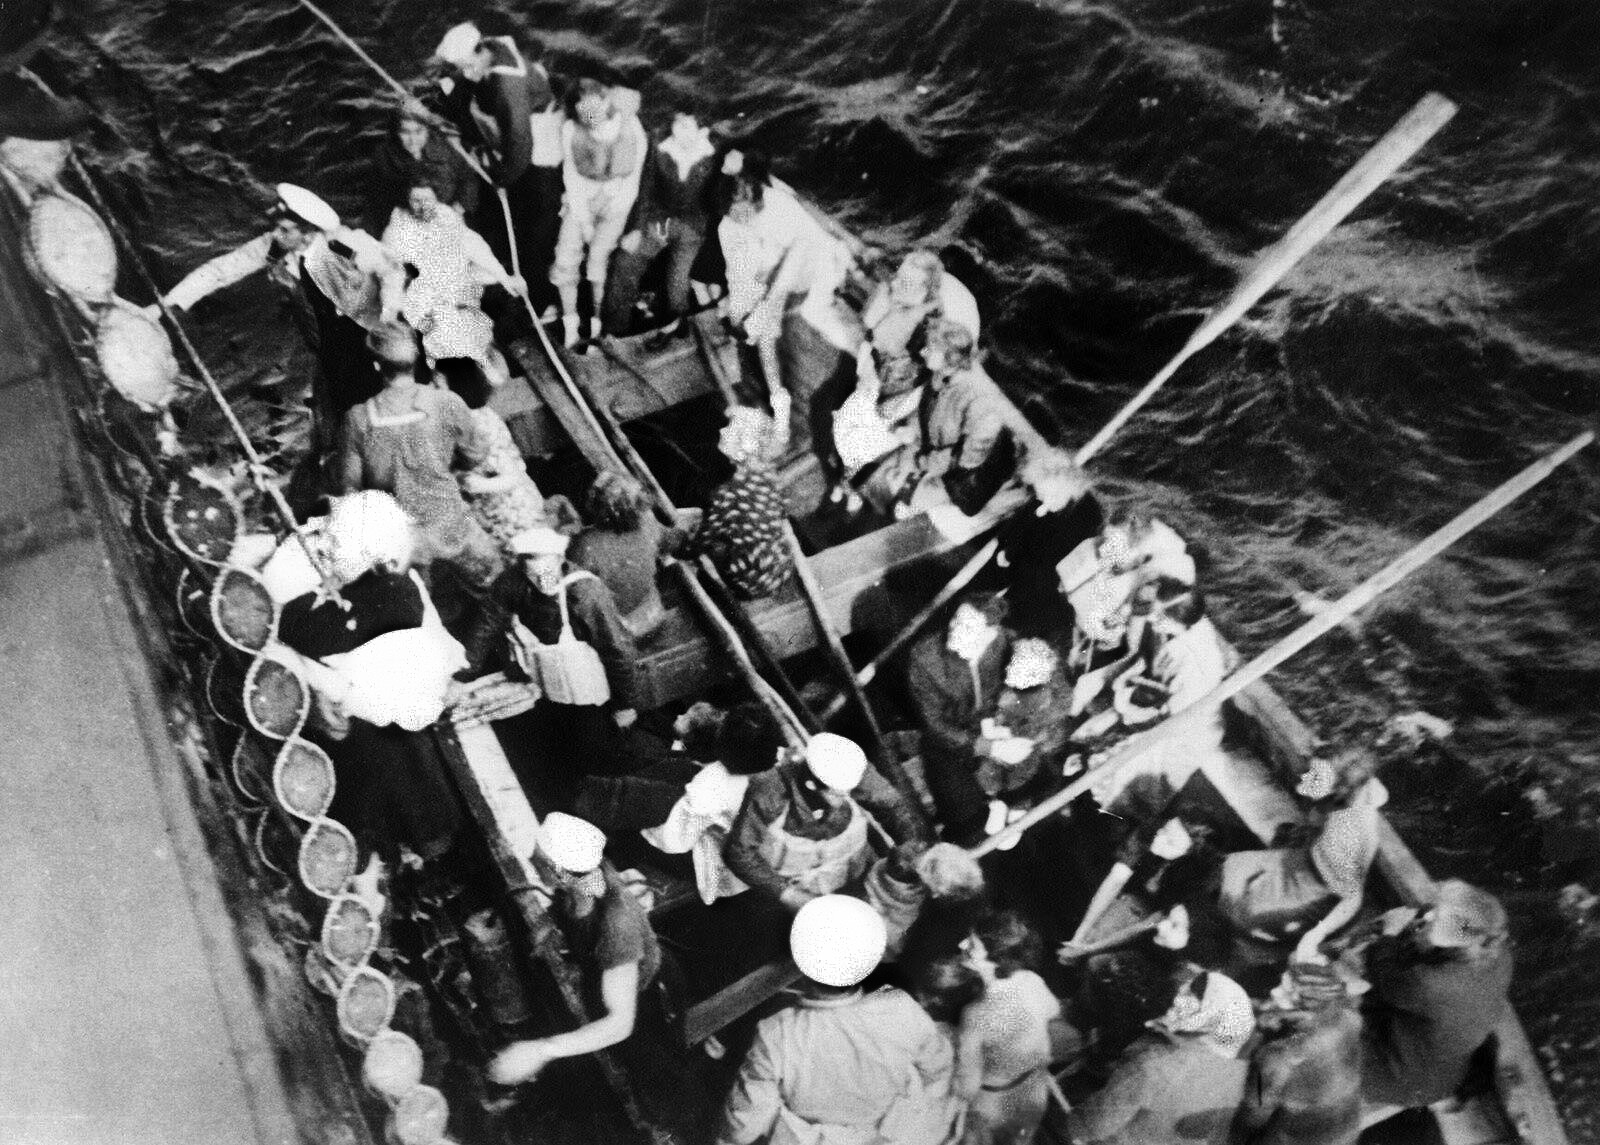 Survivors of the British liner Athenia, torpedoed by U-30, are brought aboard the merchant ship City of Flint. A month later, City of Flint was captured on the high seas by the German pocket battleship Deutschland.